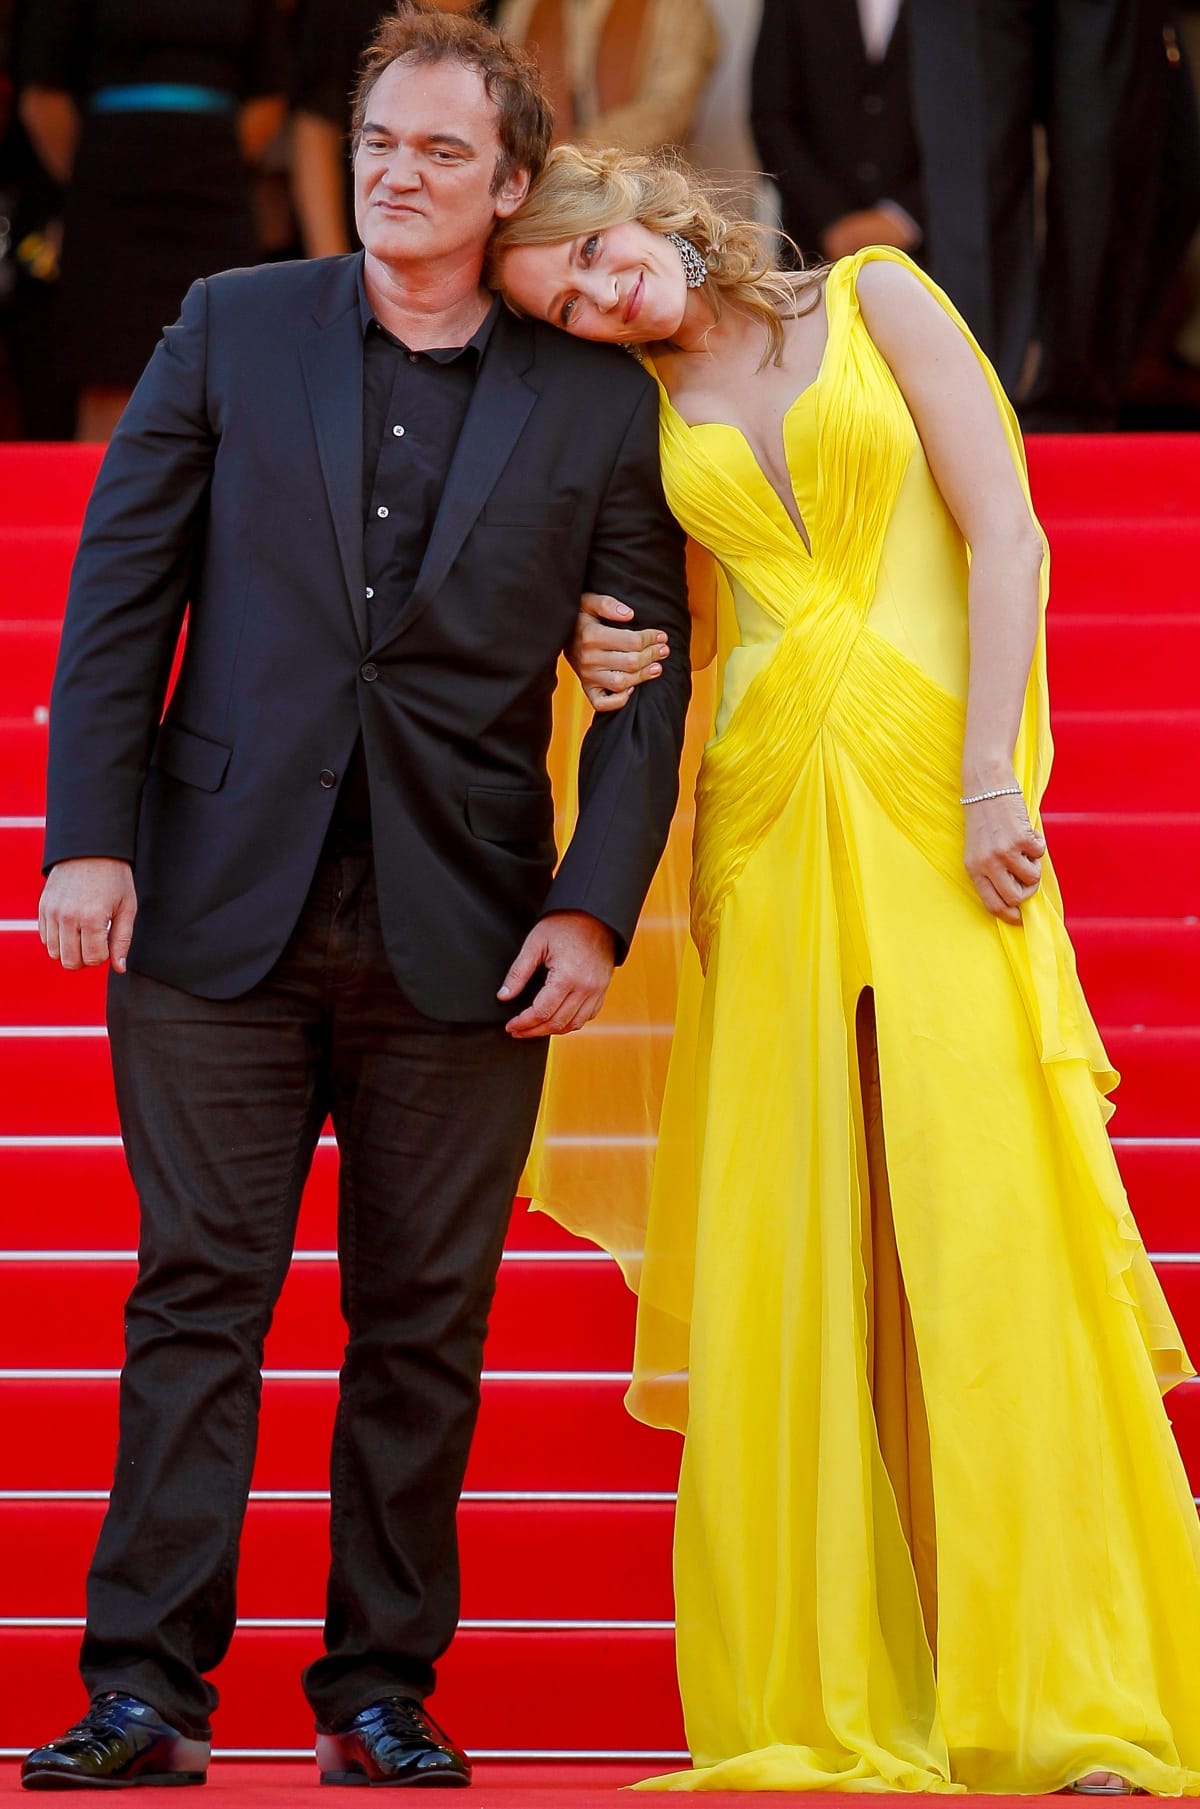 Quentin Tarantino and Uma Thurman keeping close to each other at the premiere of Sils Maria during the 67th Cannes Film Festival